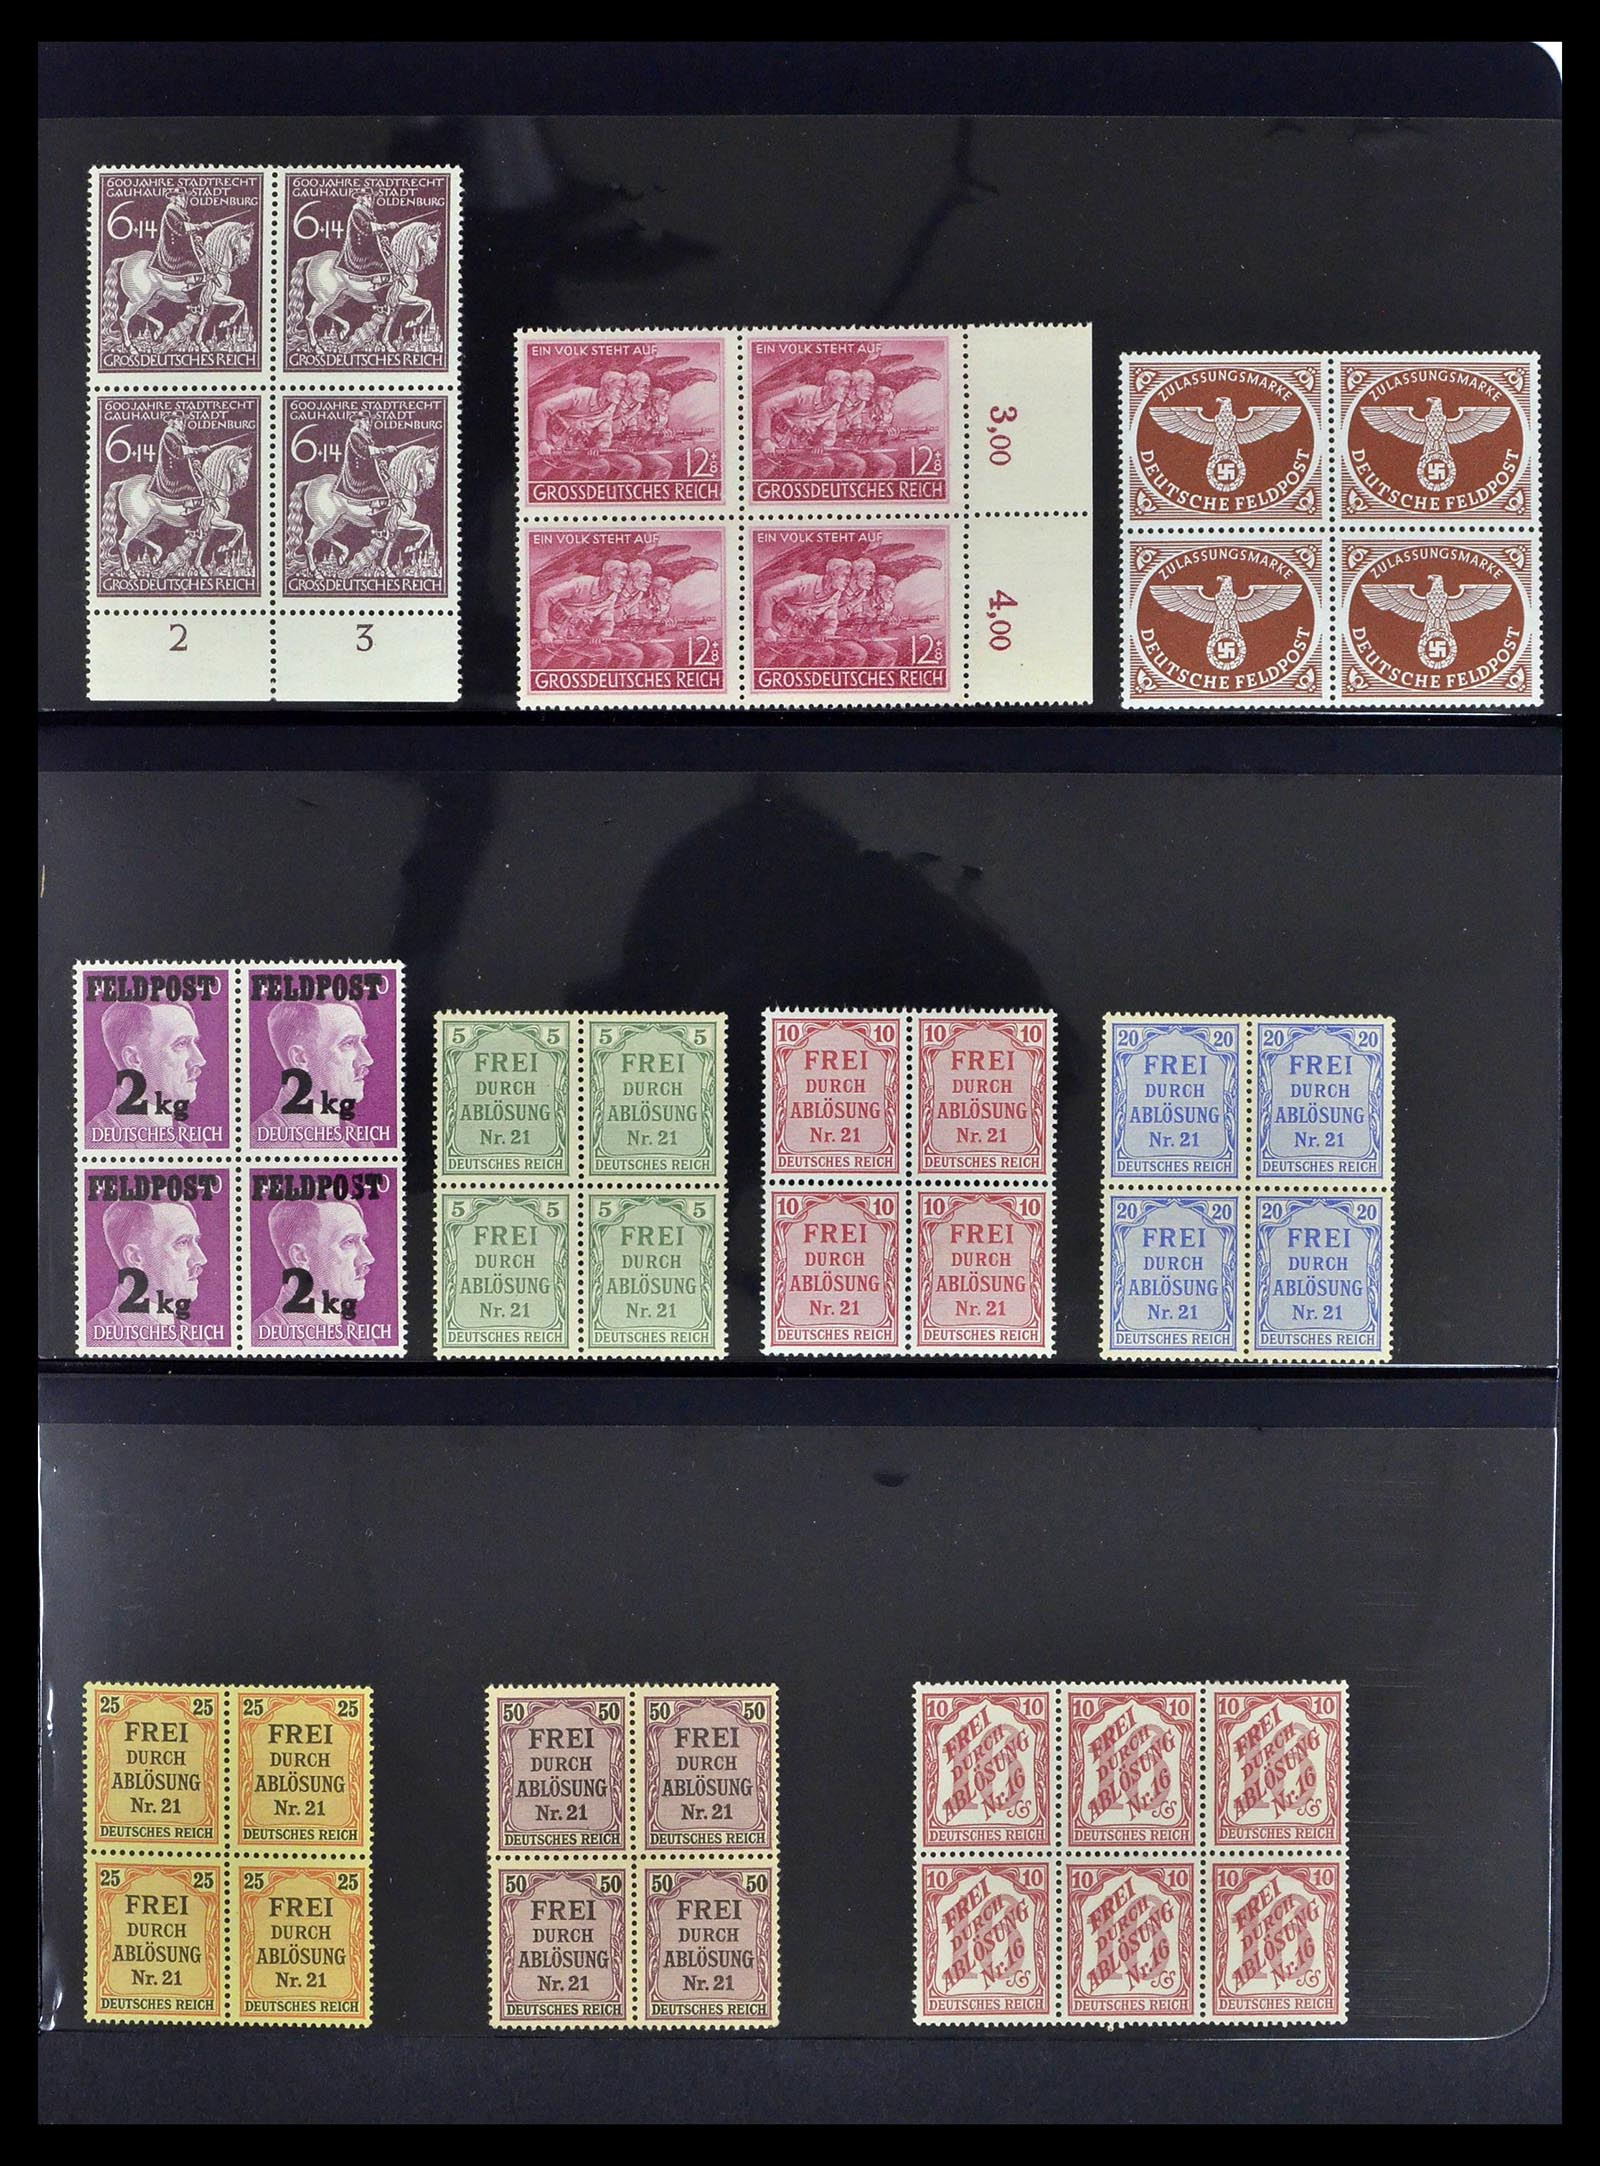 39255 0031 - Stamp collection 39255 German Reich MNH blocks of 4.